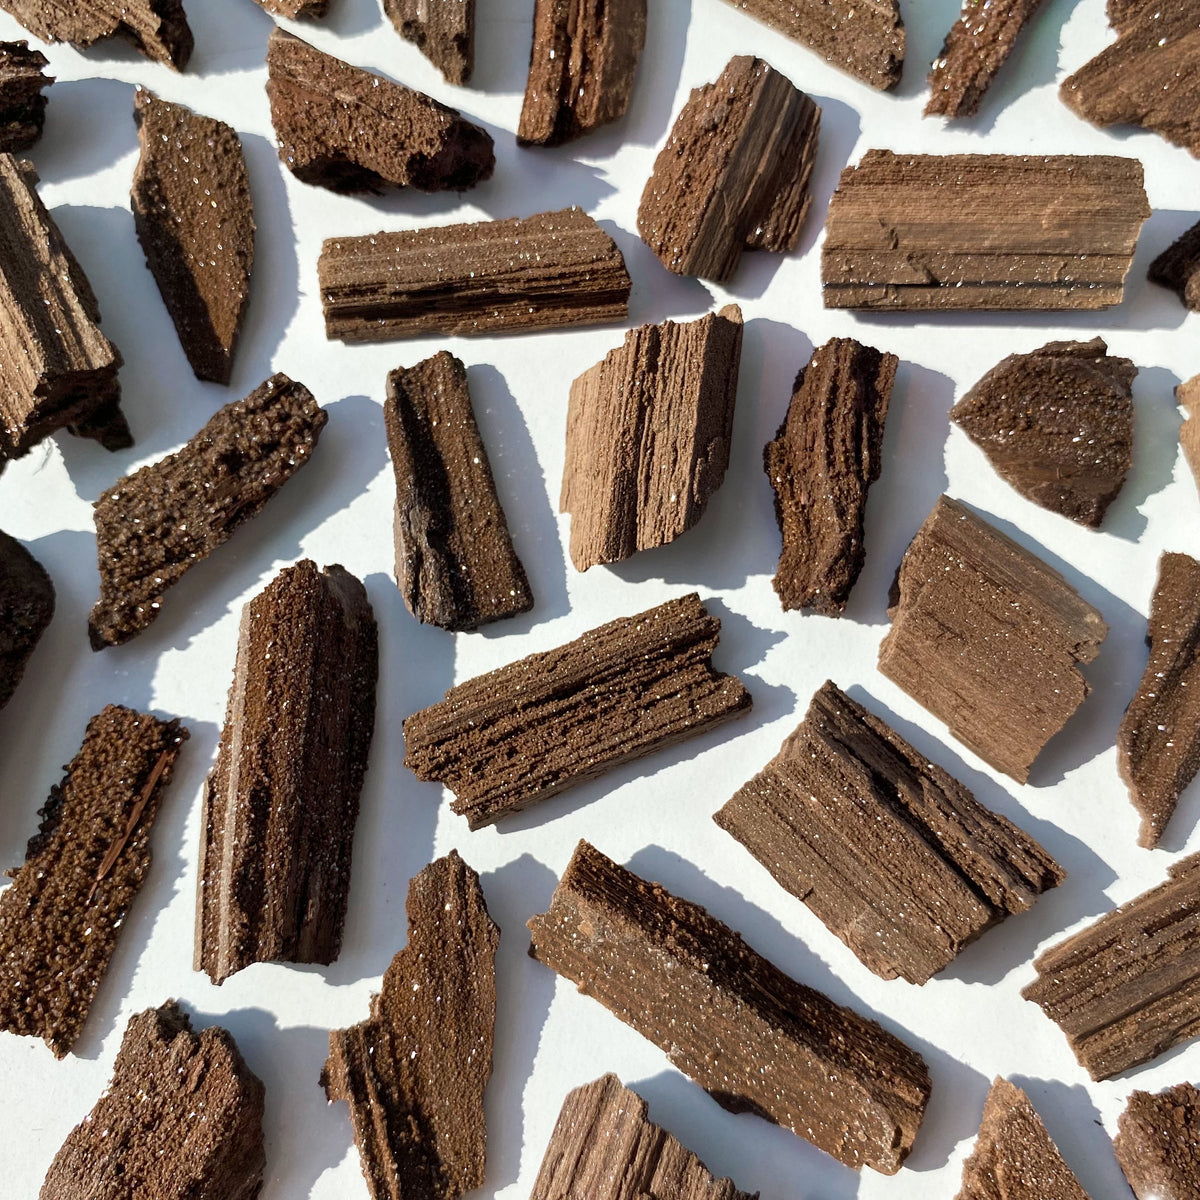 Permineralized Wood Specimens